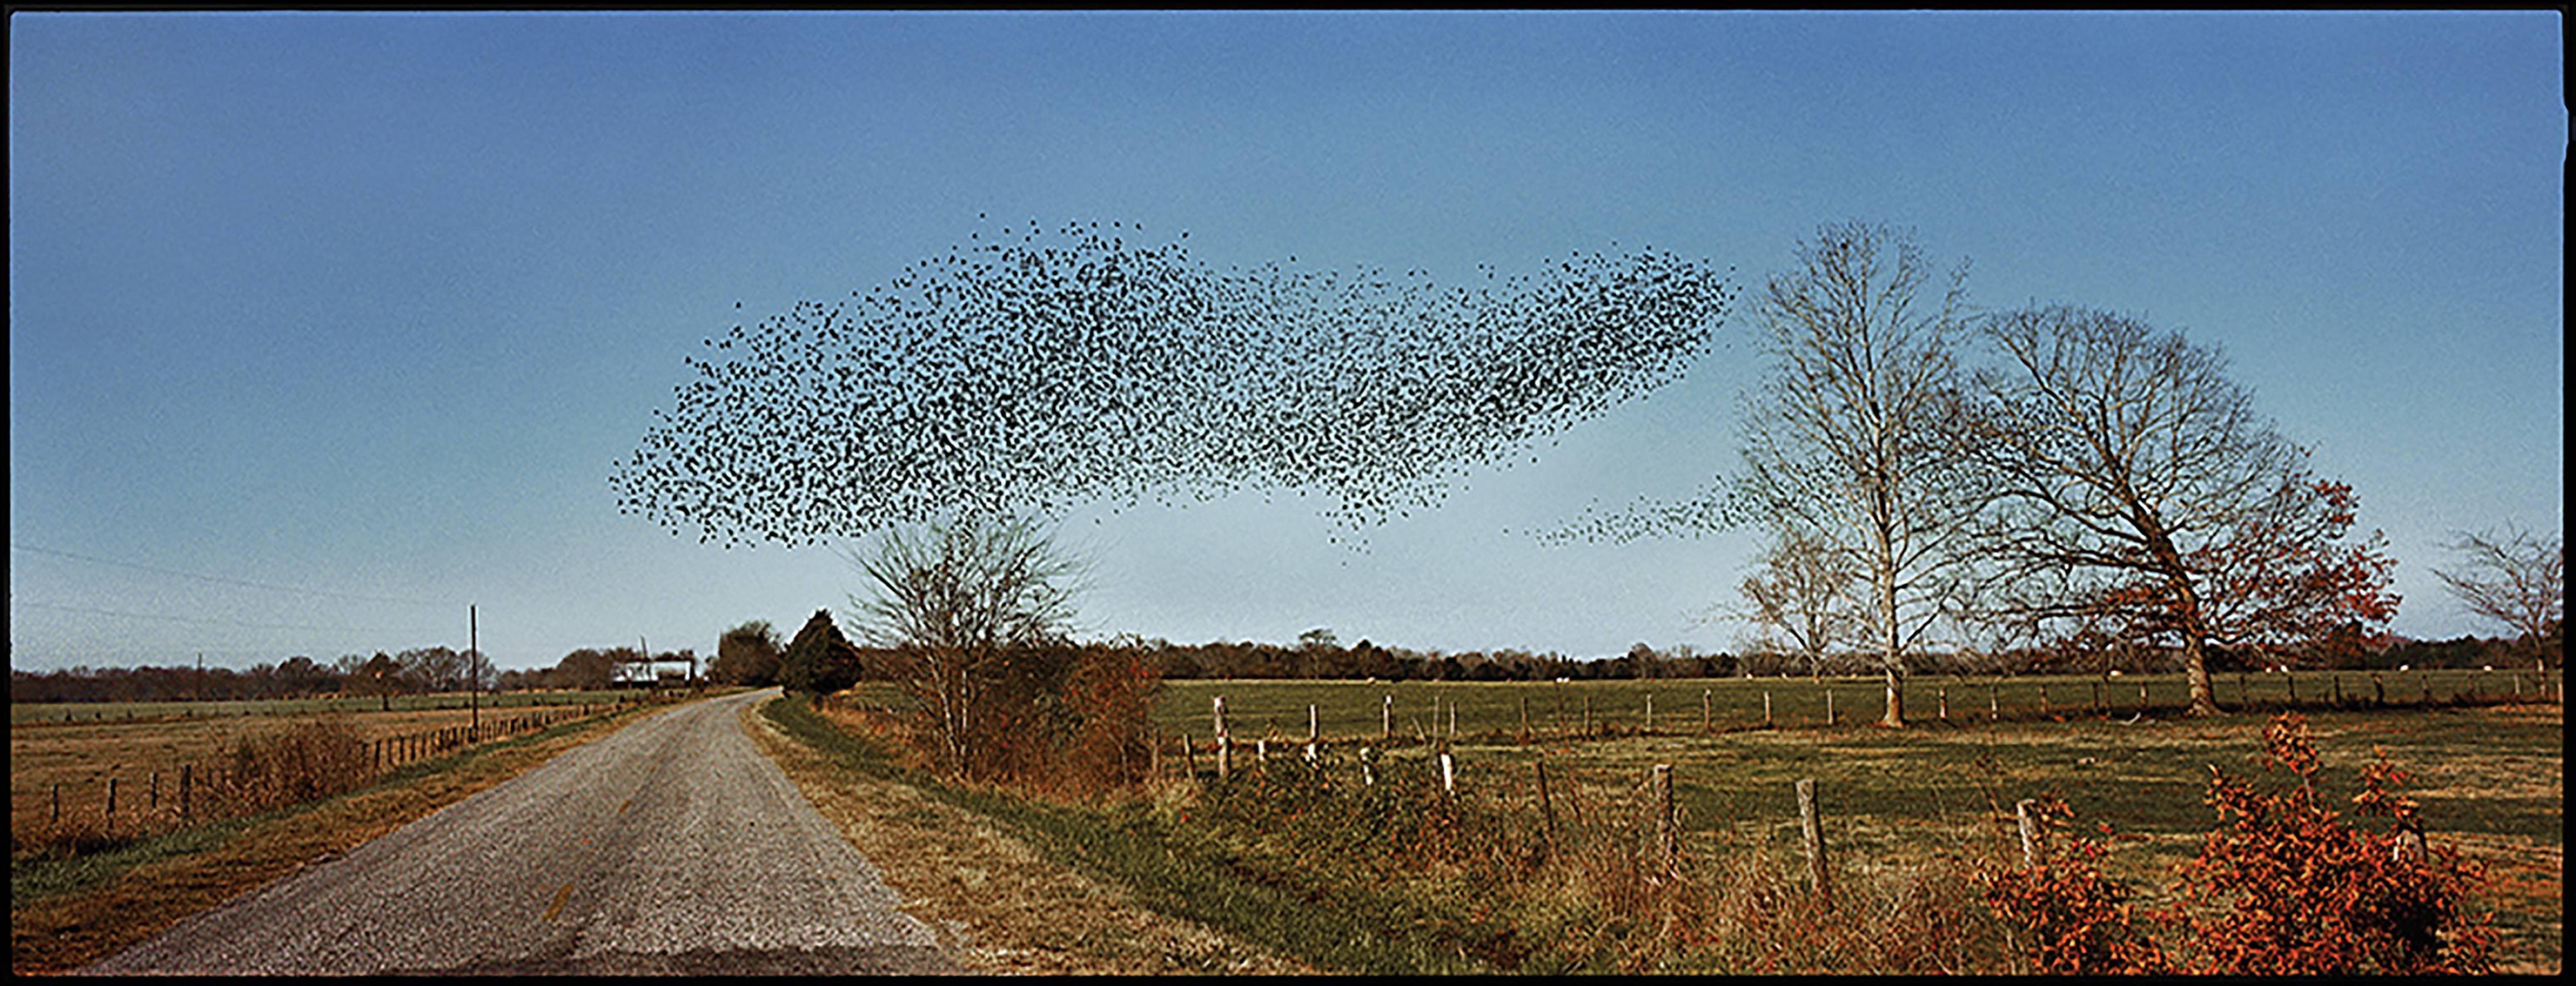 Jerry Siegel Landscape Photograph - "Birds, Perry County, AL" - Southern Documentary Photography - Christenberry